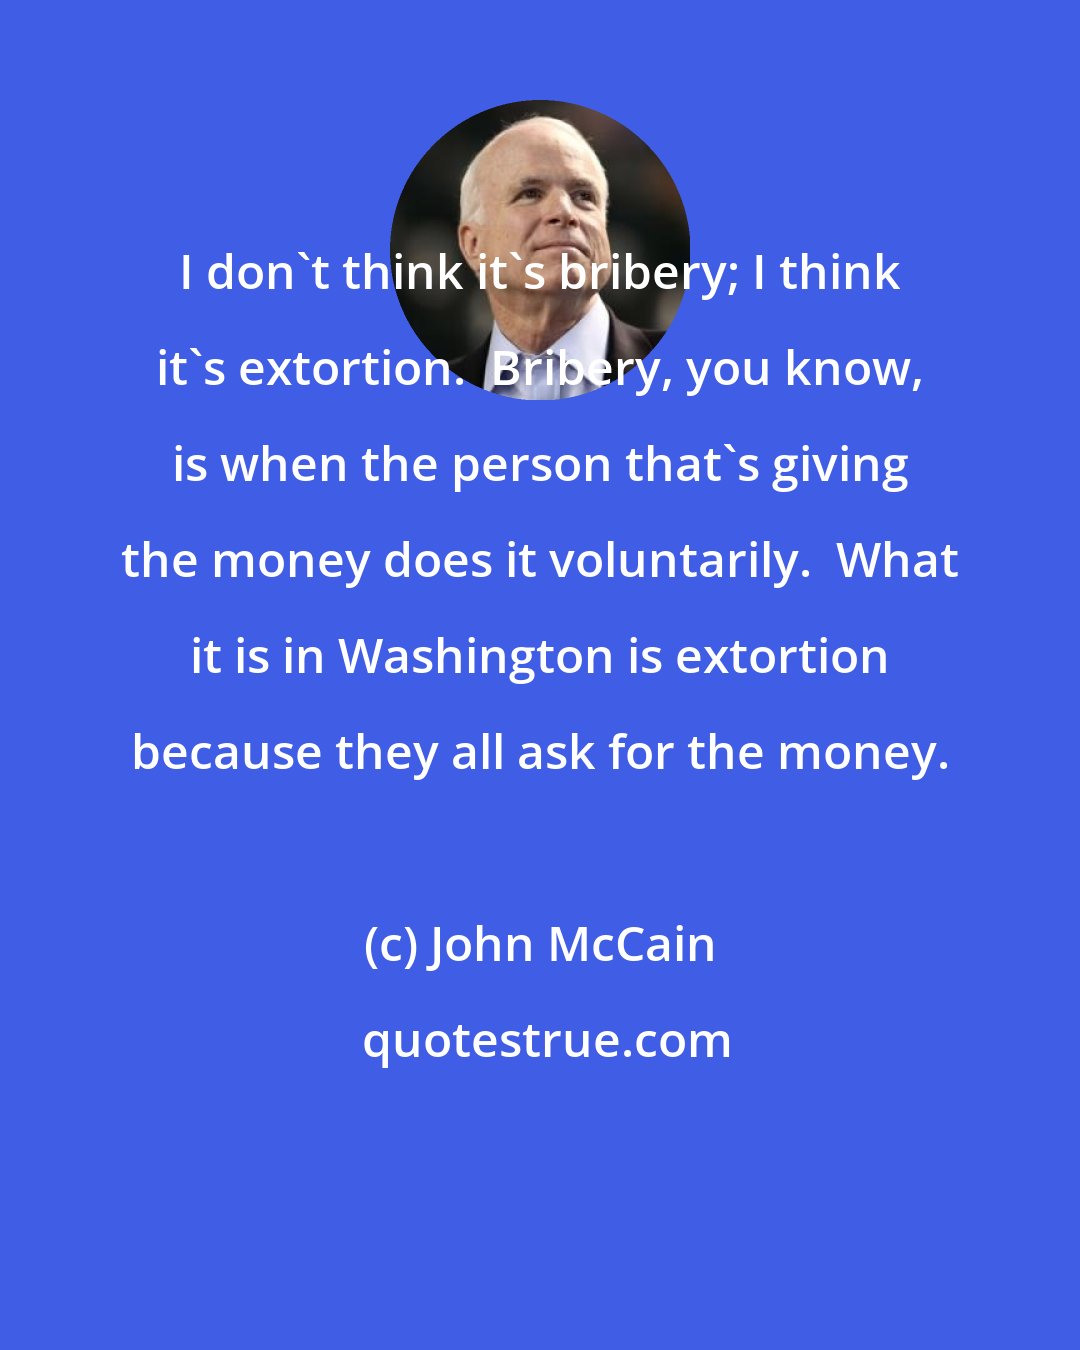 John McCain: I don't think it's bribery; I think it's extortion.  Bribery, you know, is when the person that's giving the money does it voluntarily.  What it is in Washington is extortion because they all ask for the money.